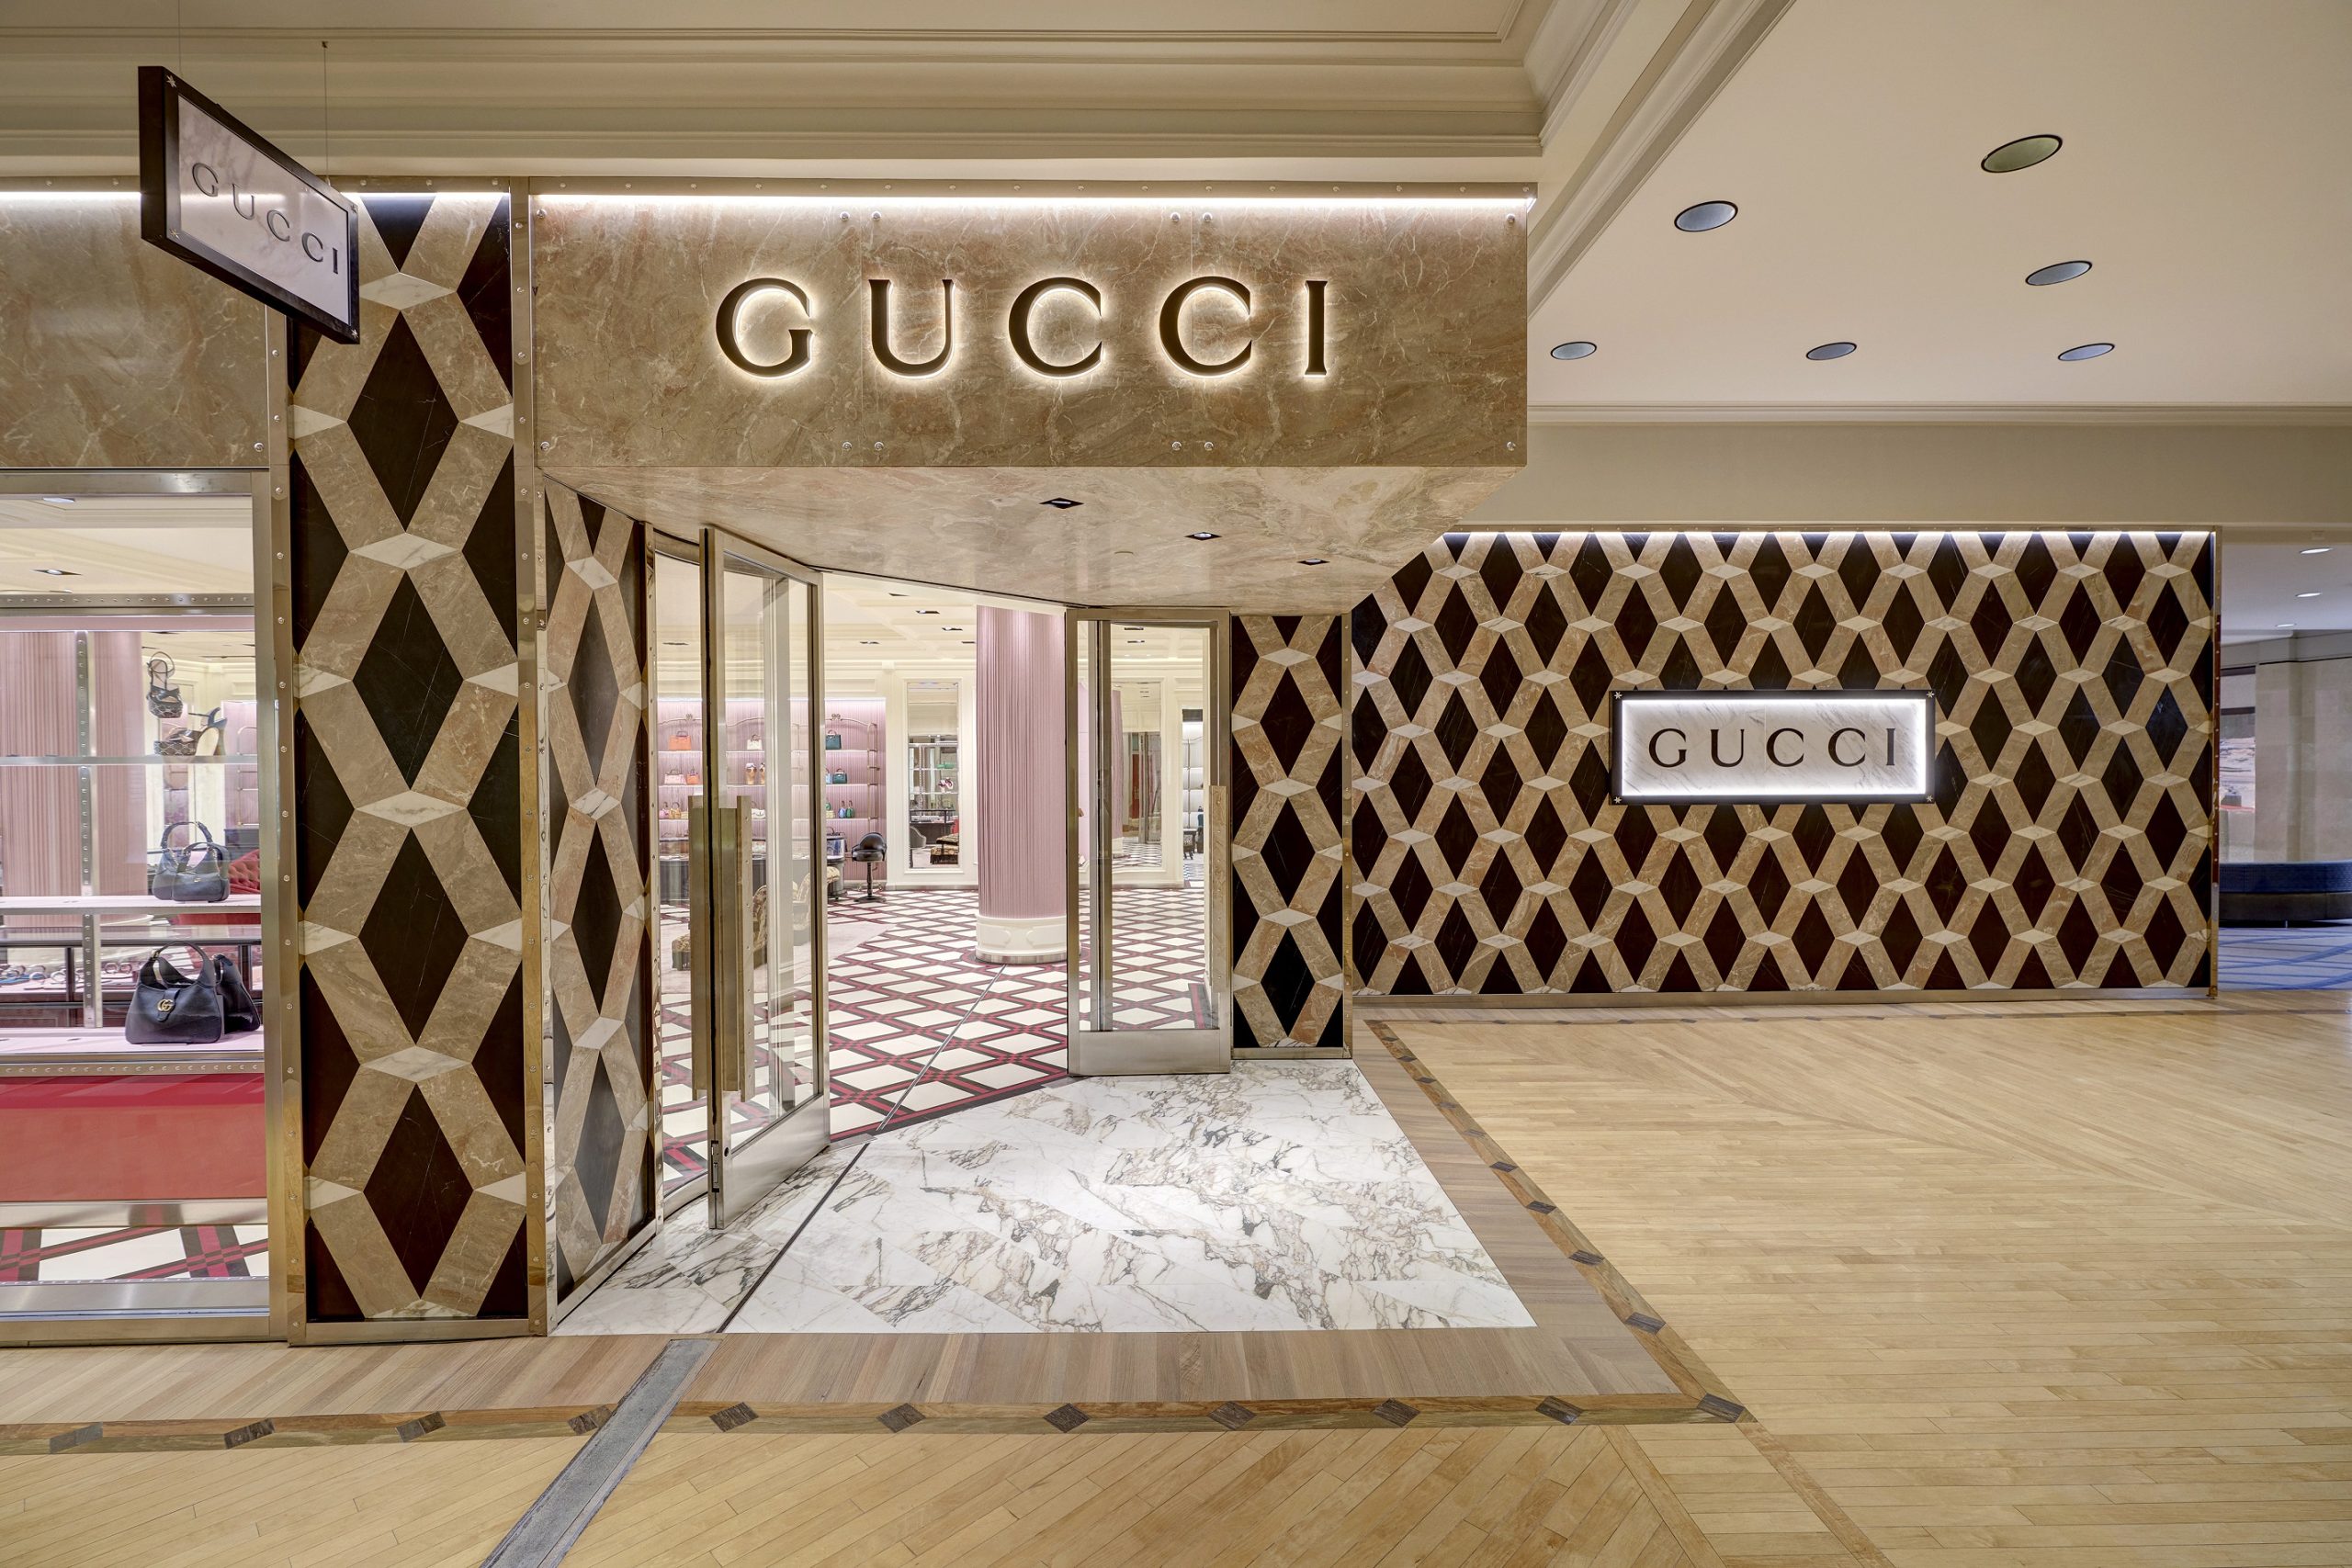 Now open GUCCI at Plaza Frontenac in St. Louis